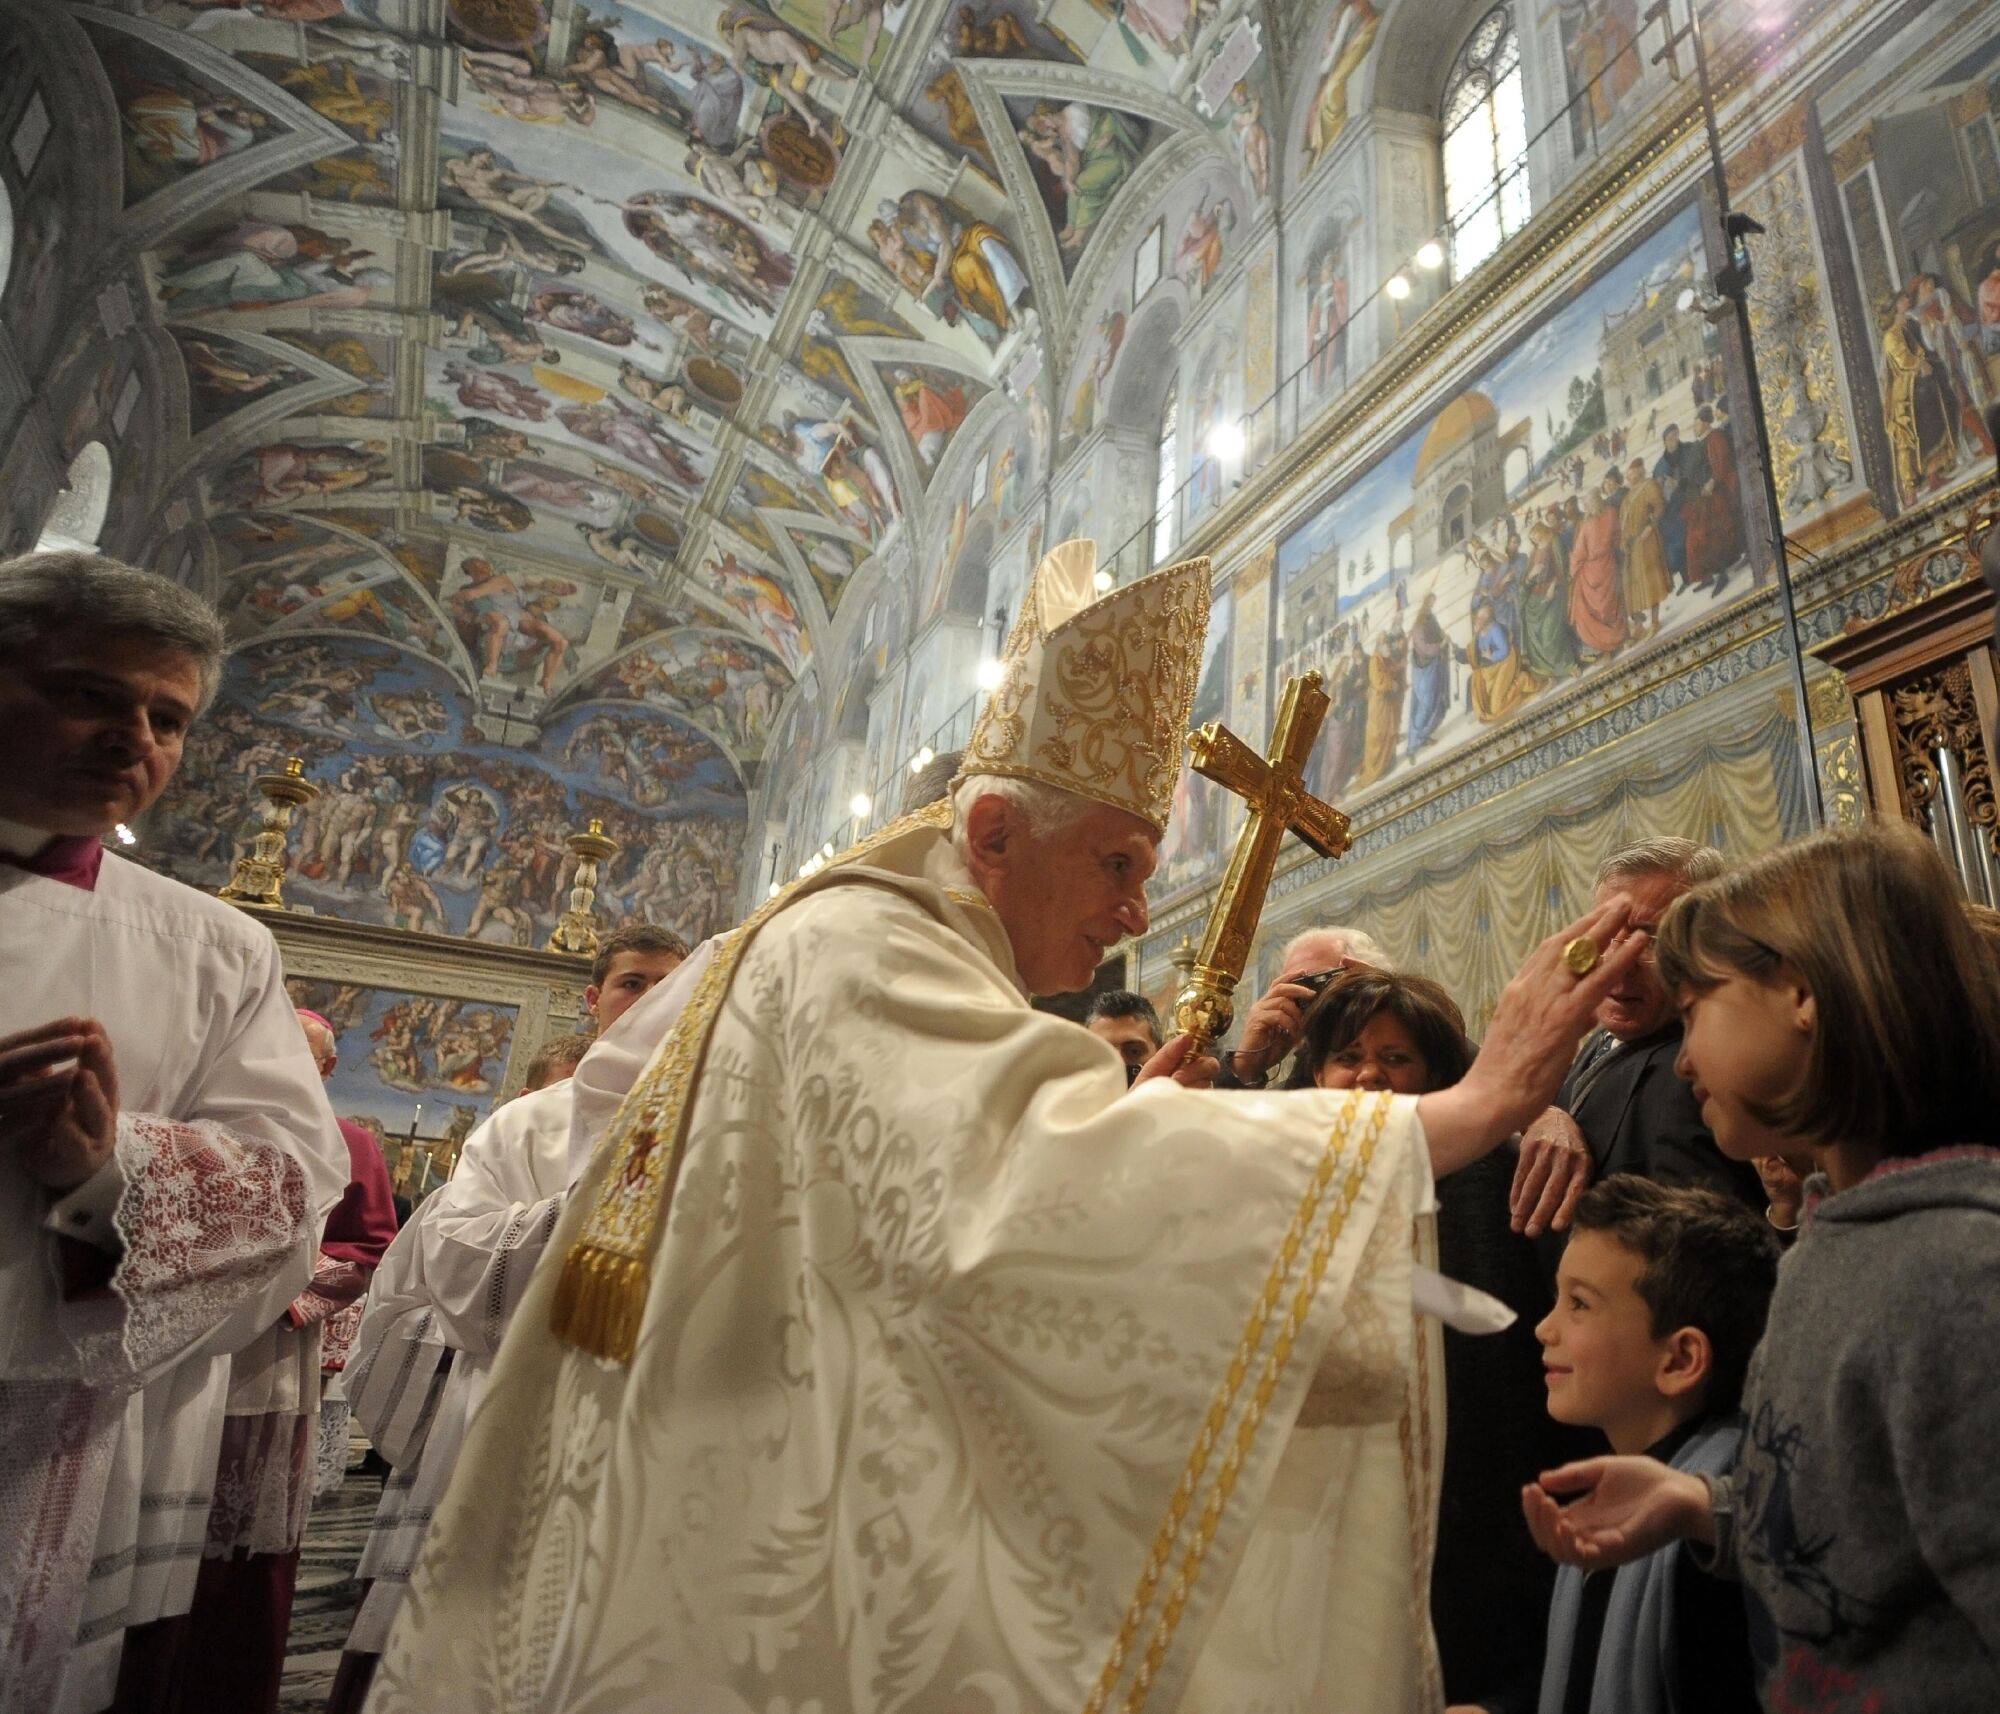 Pope Benedict XVI in off white vestments holds out a hand to children in the Sistine Chapel.